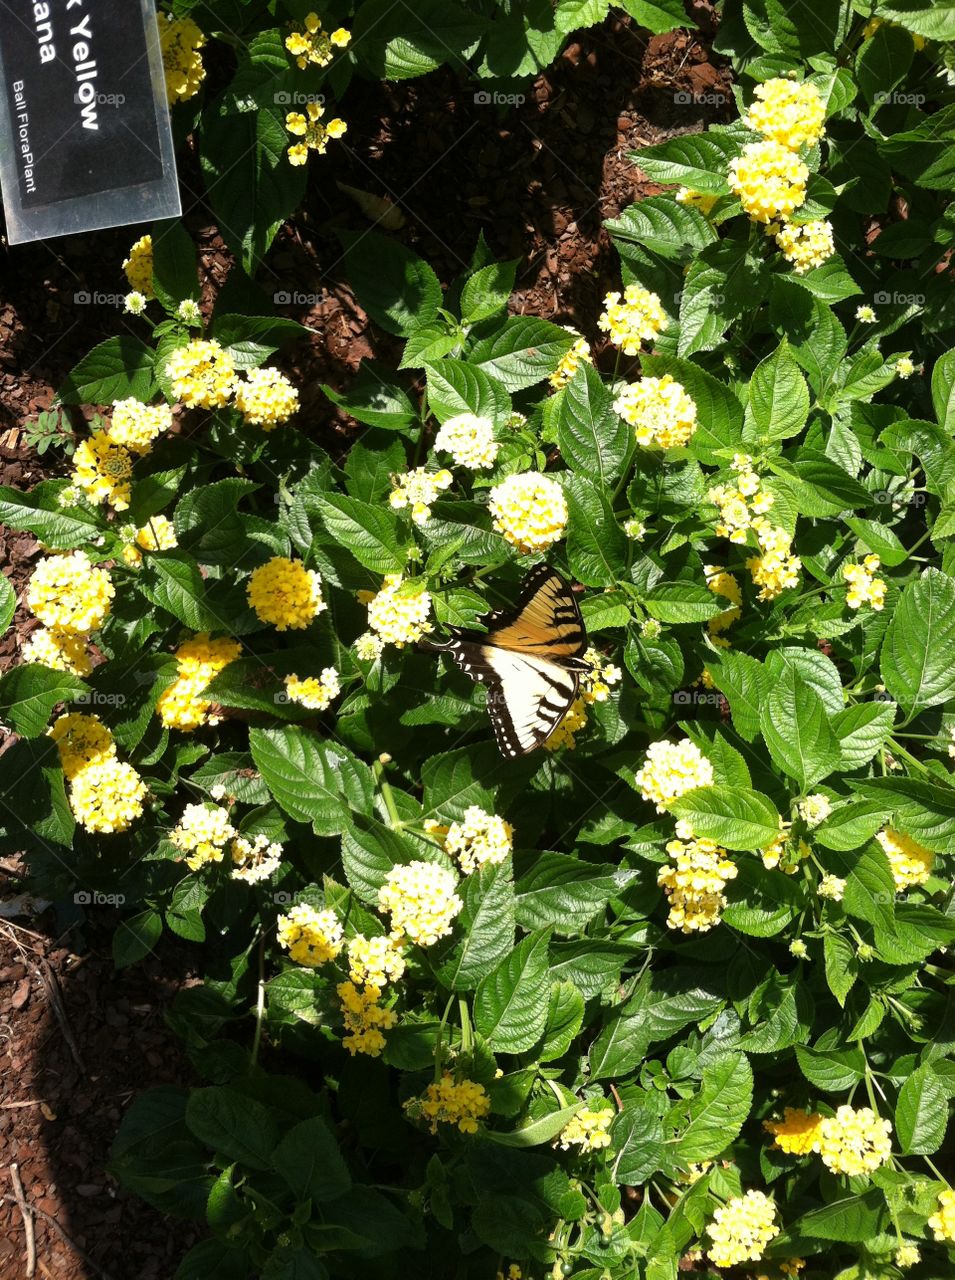 Butterfly in center of garden. Butterfly landed in middle of yellow blooming flower garden
